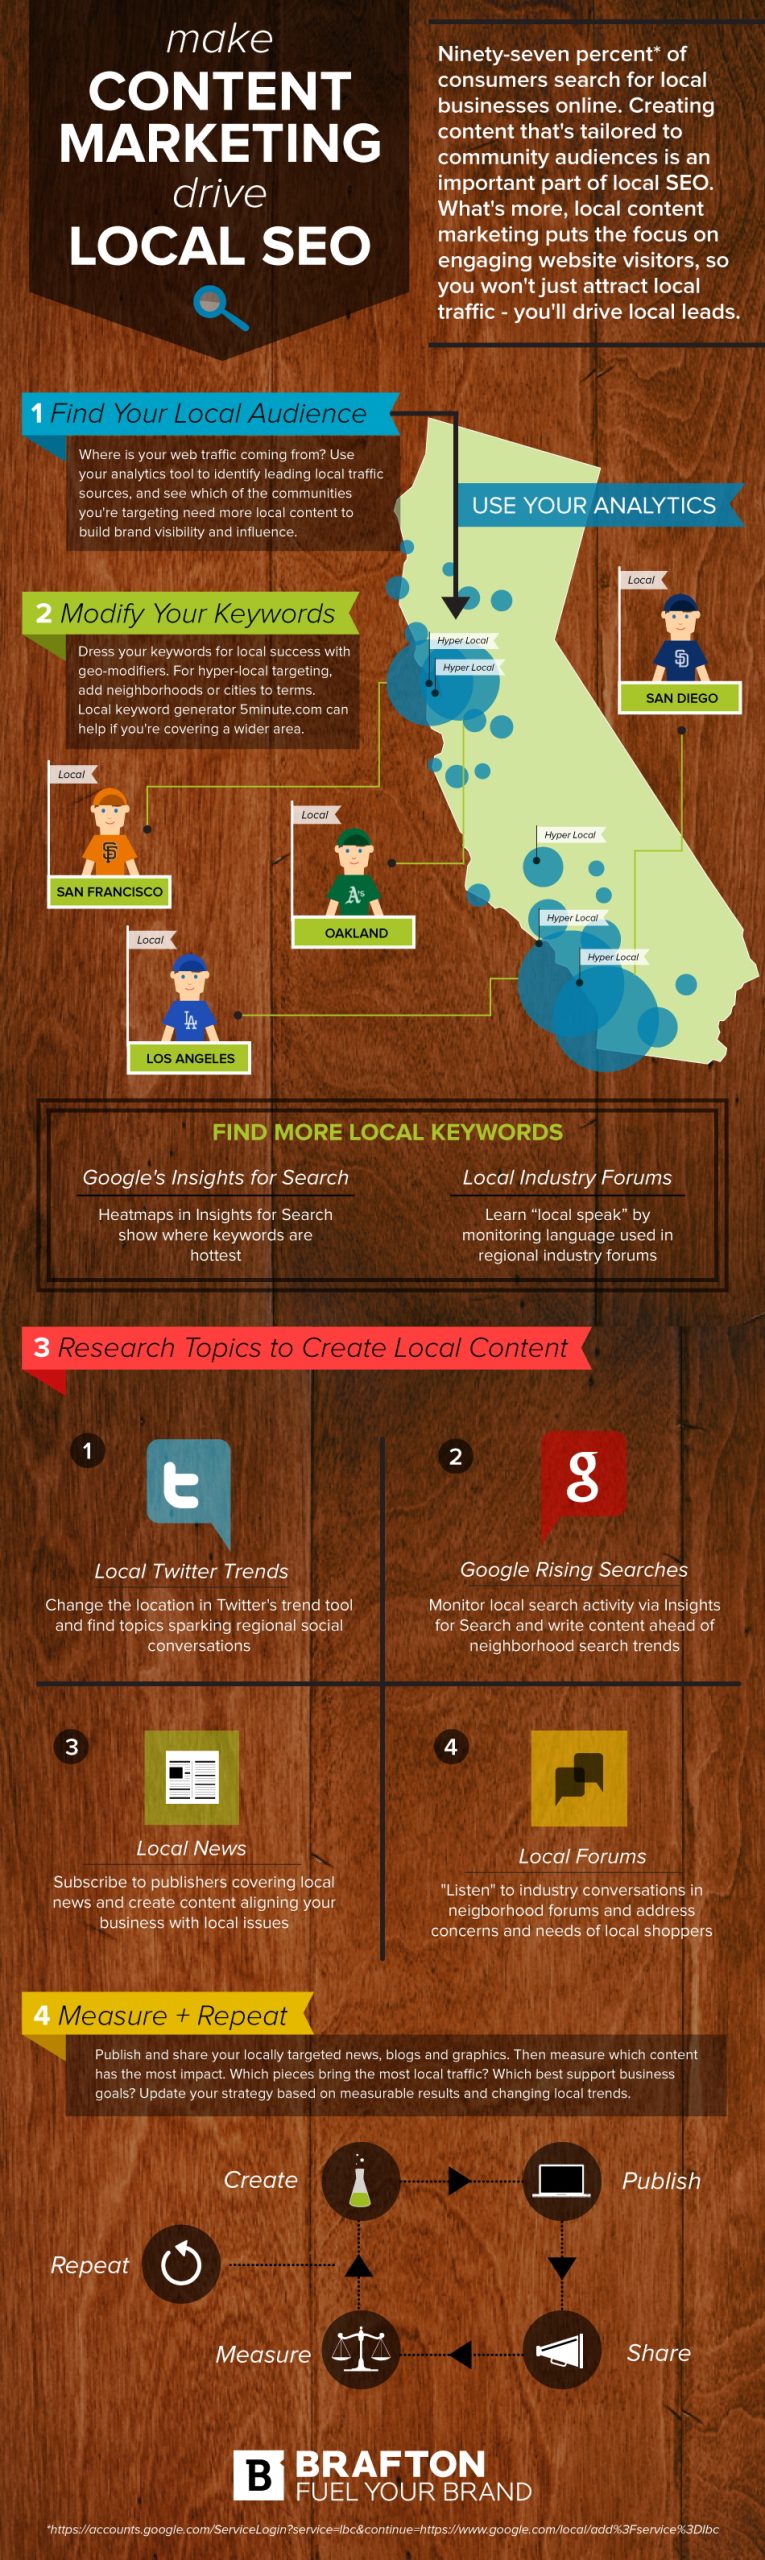 Strategic content marketing can power local SEO and engage community audiences, build visibility, thought leadership and local leads.